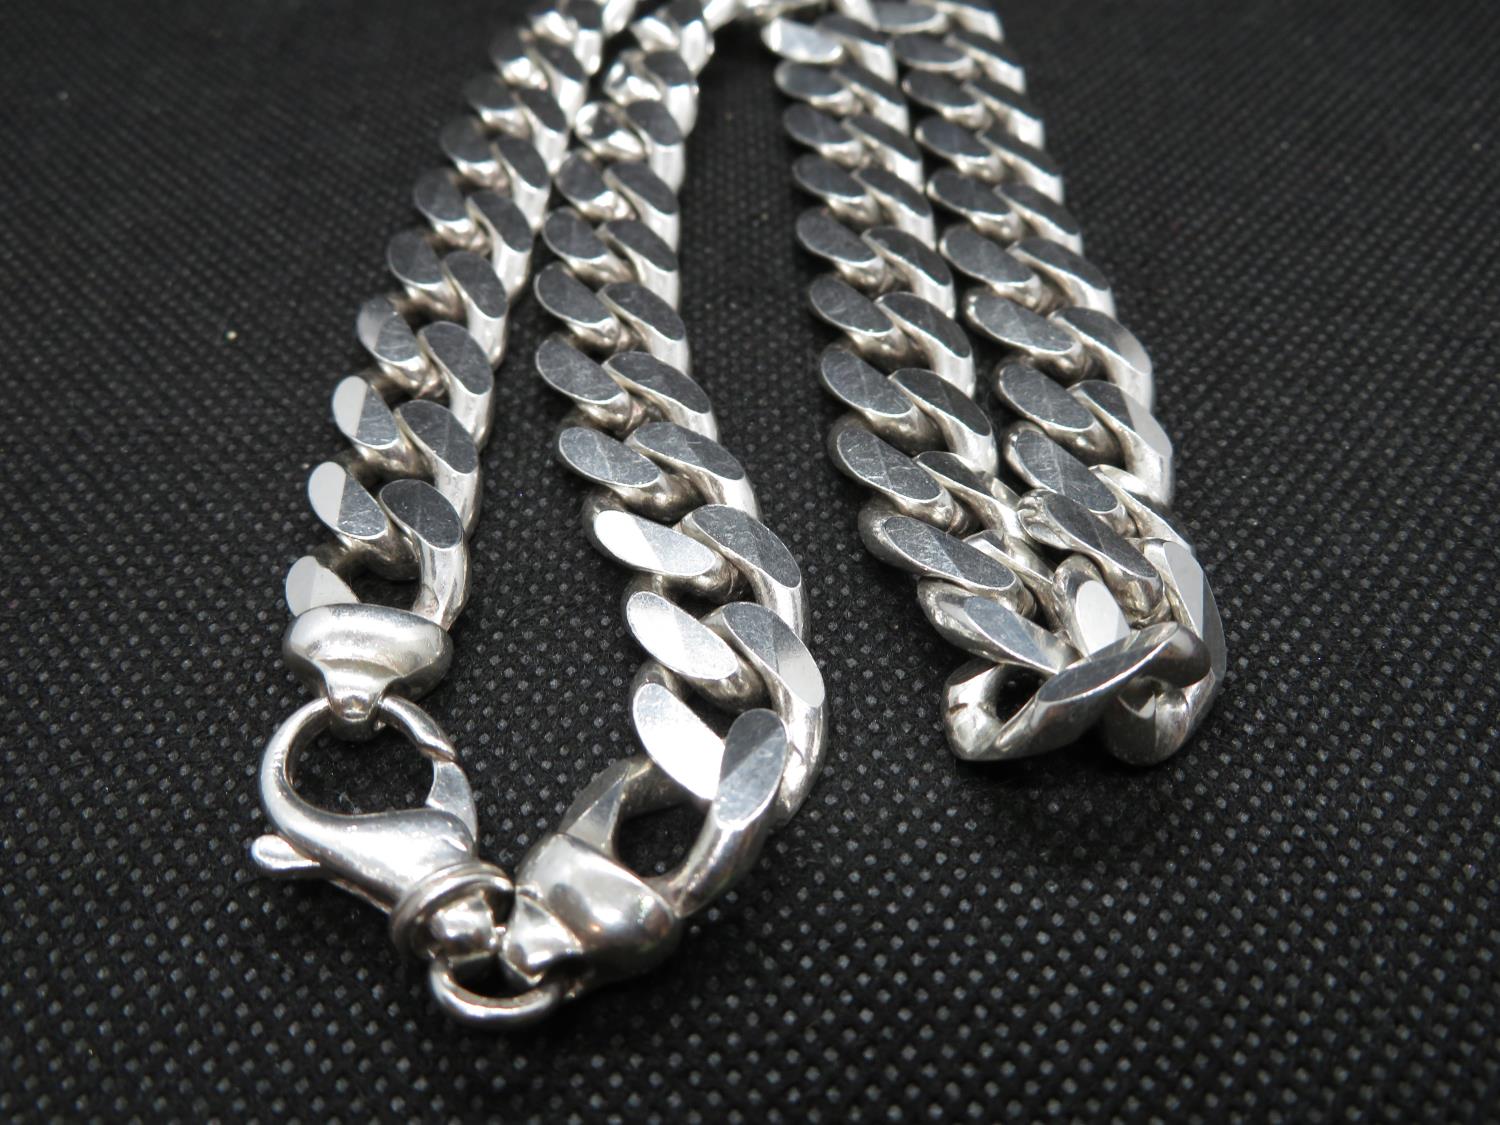 Chunky silver curb link chain 20" 139.5g - Image 2 of 2